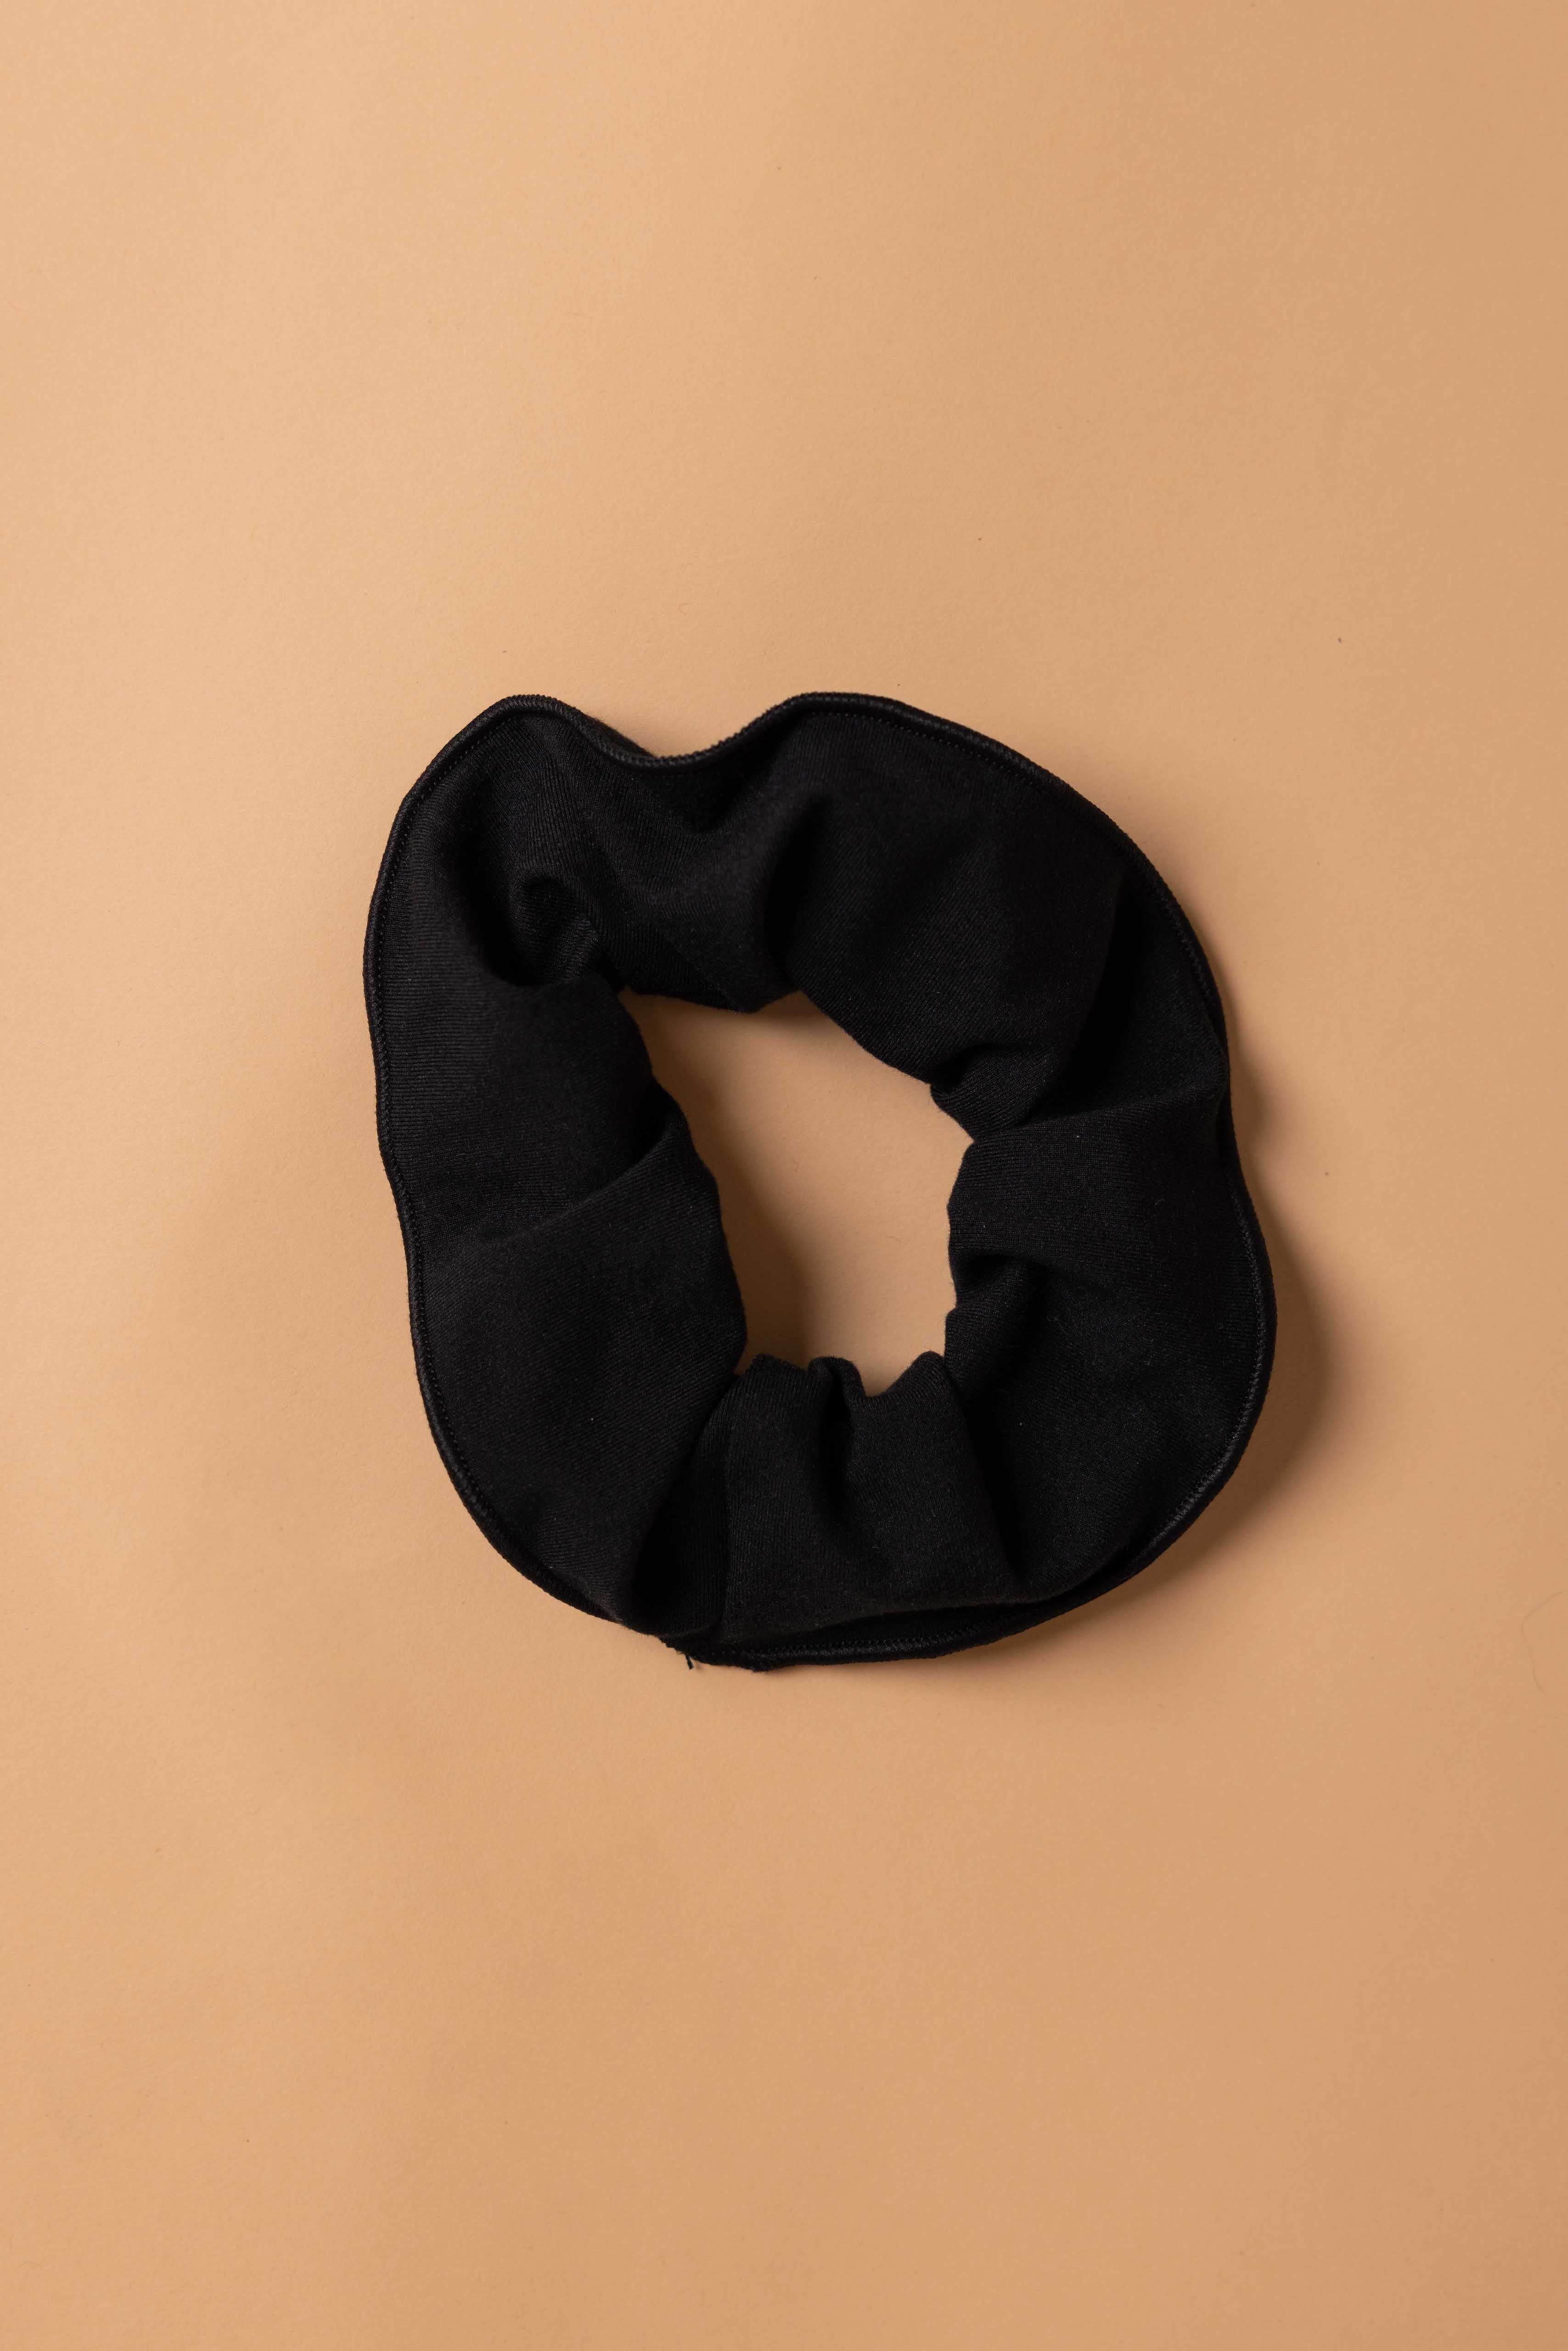 SCRUNCHIES THAT PROMOTE HAIR GROWTH